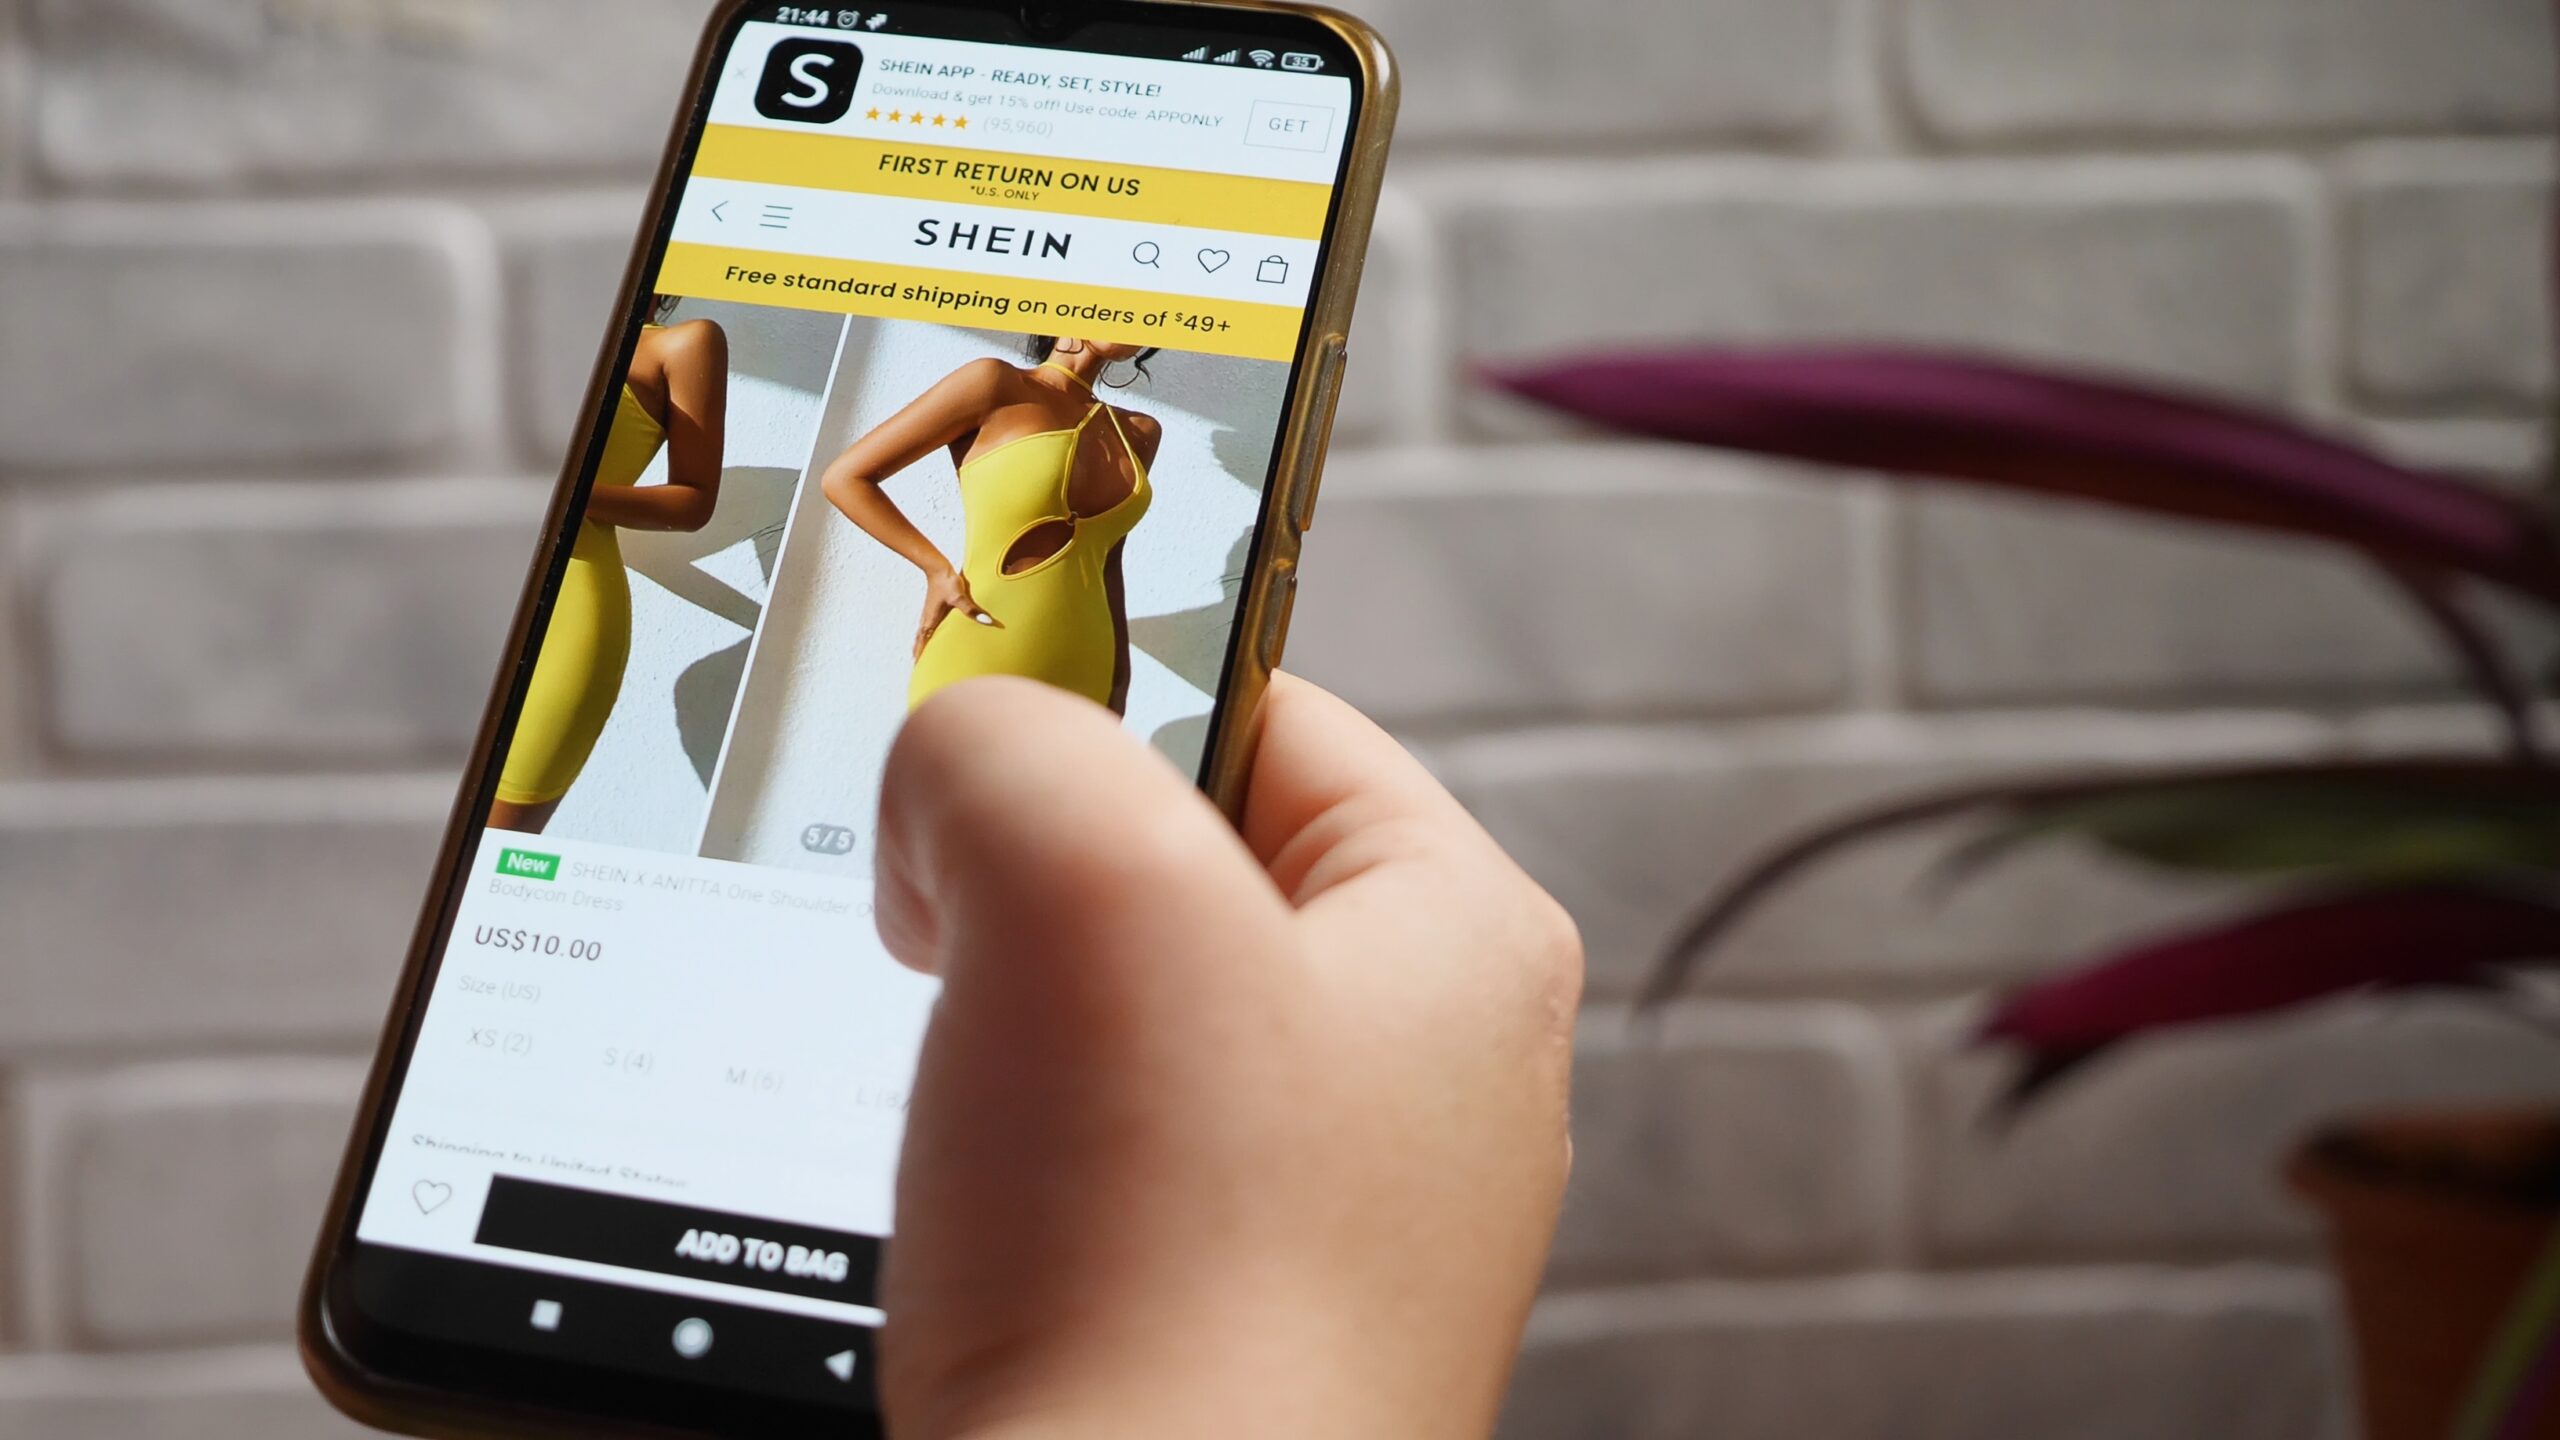 Shein acquires Missguided; case study on its growth to largest online fashion seller – InternetRetailing